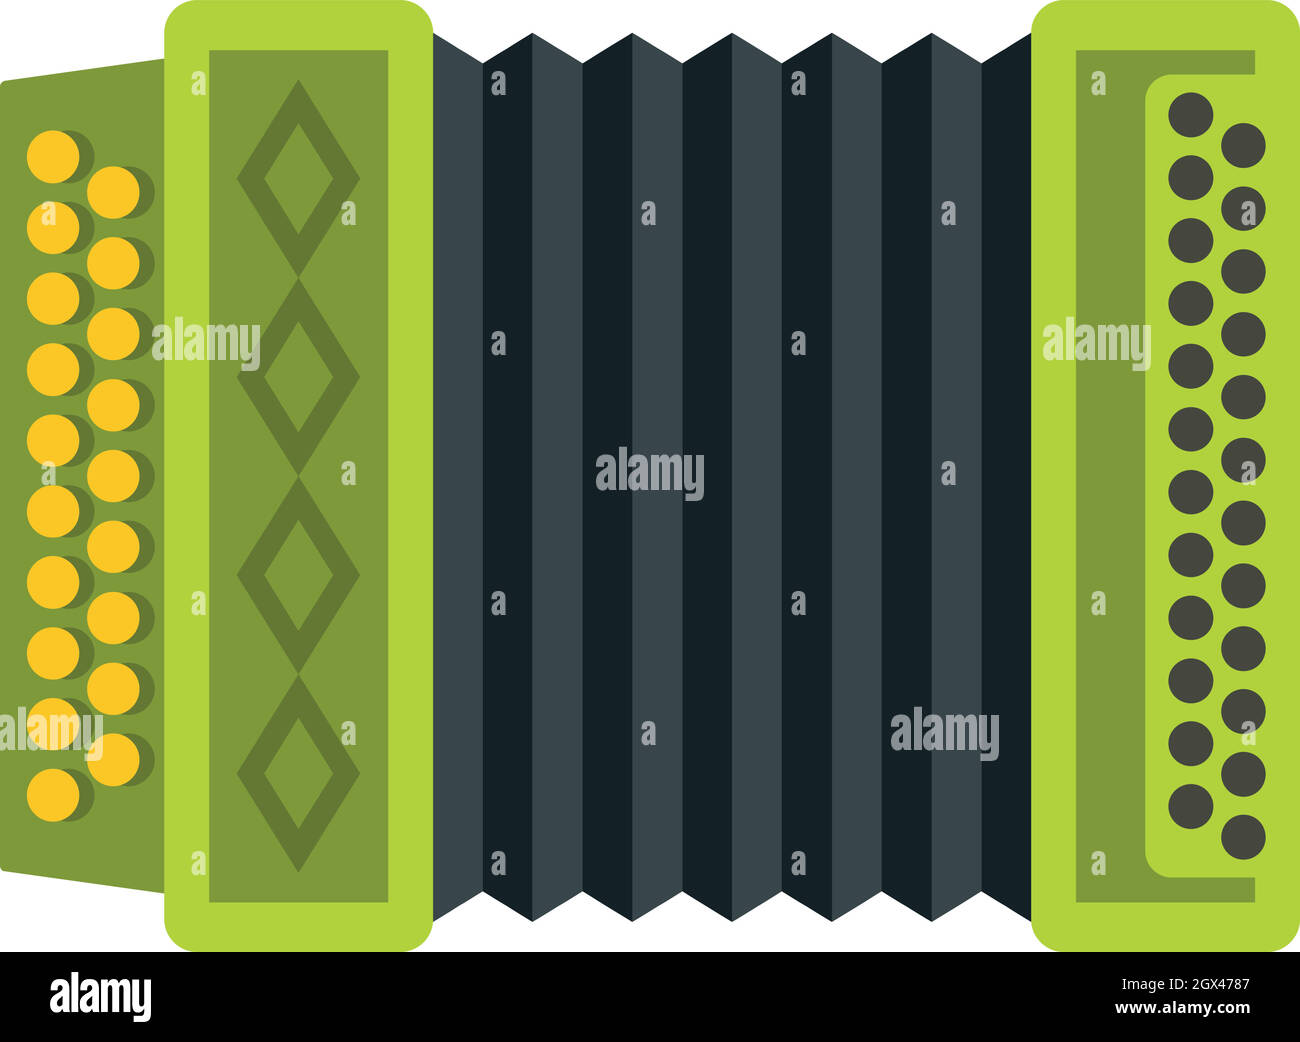 Playing accordion vintage Stock Vector Images - Alamy